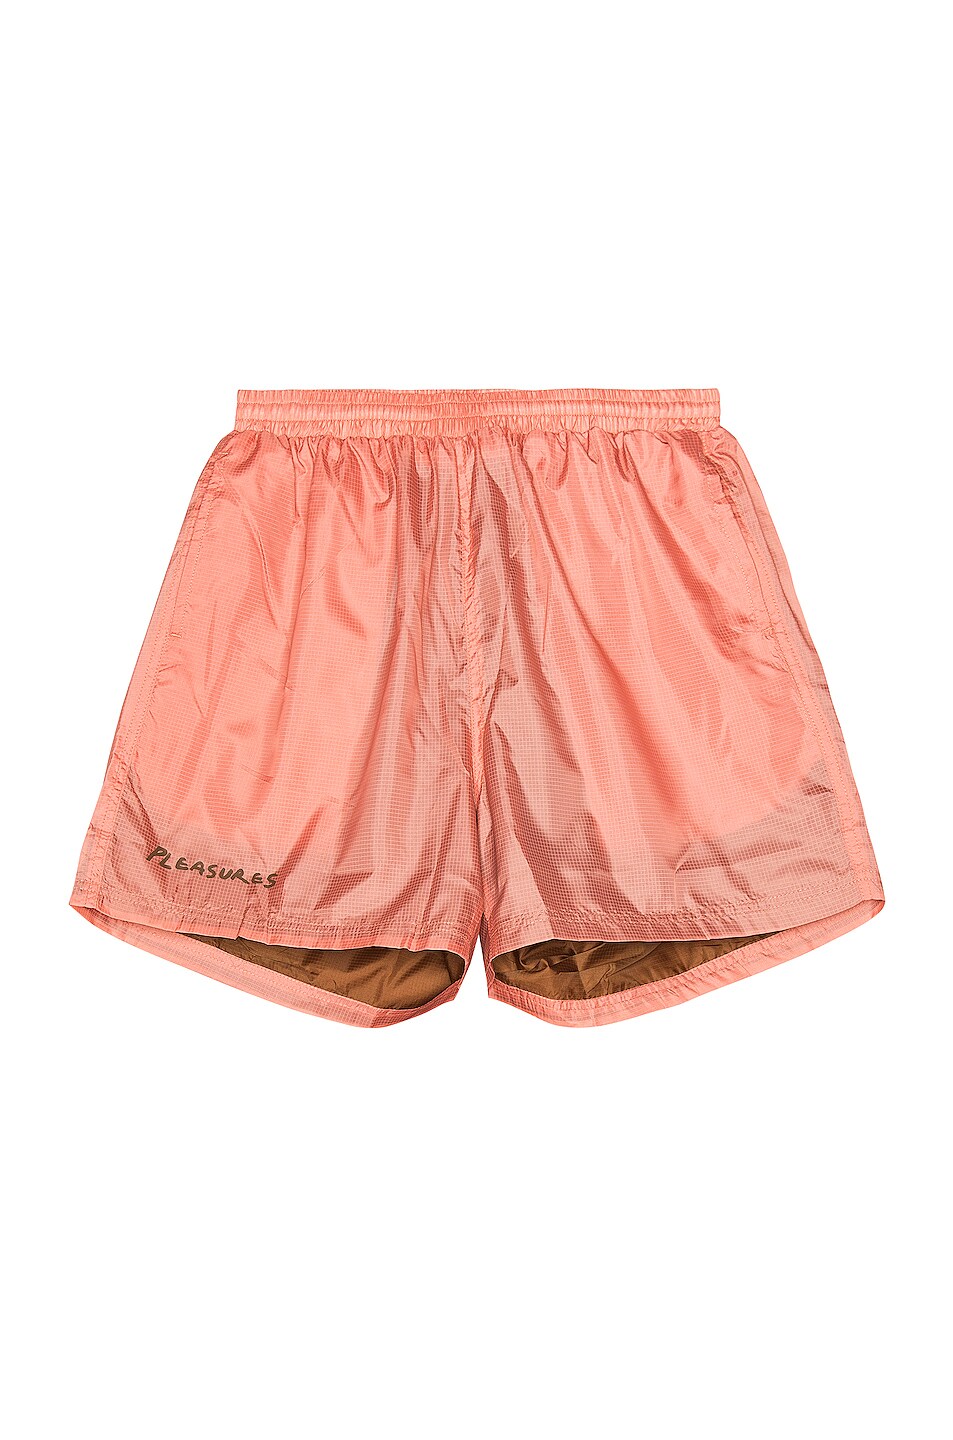 Image 1 of Pleasures VCR Active Shorts in Clay